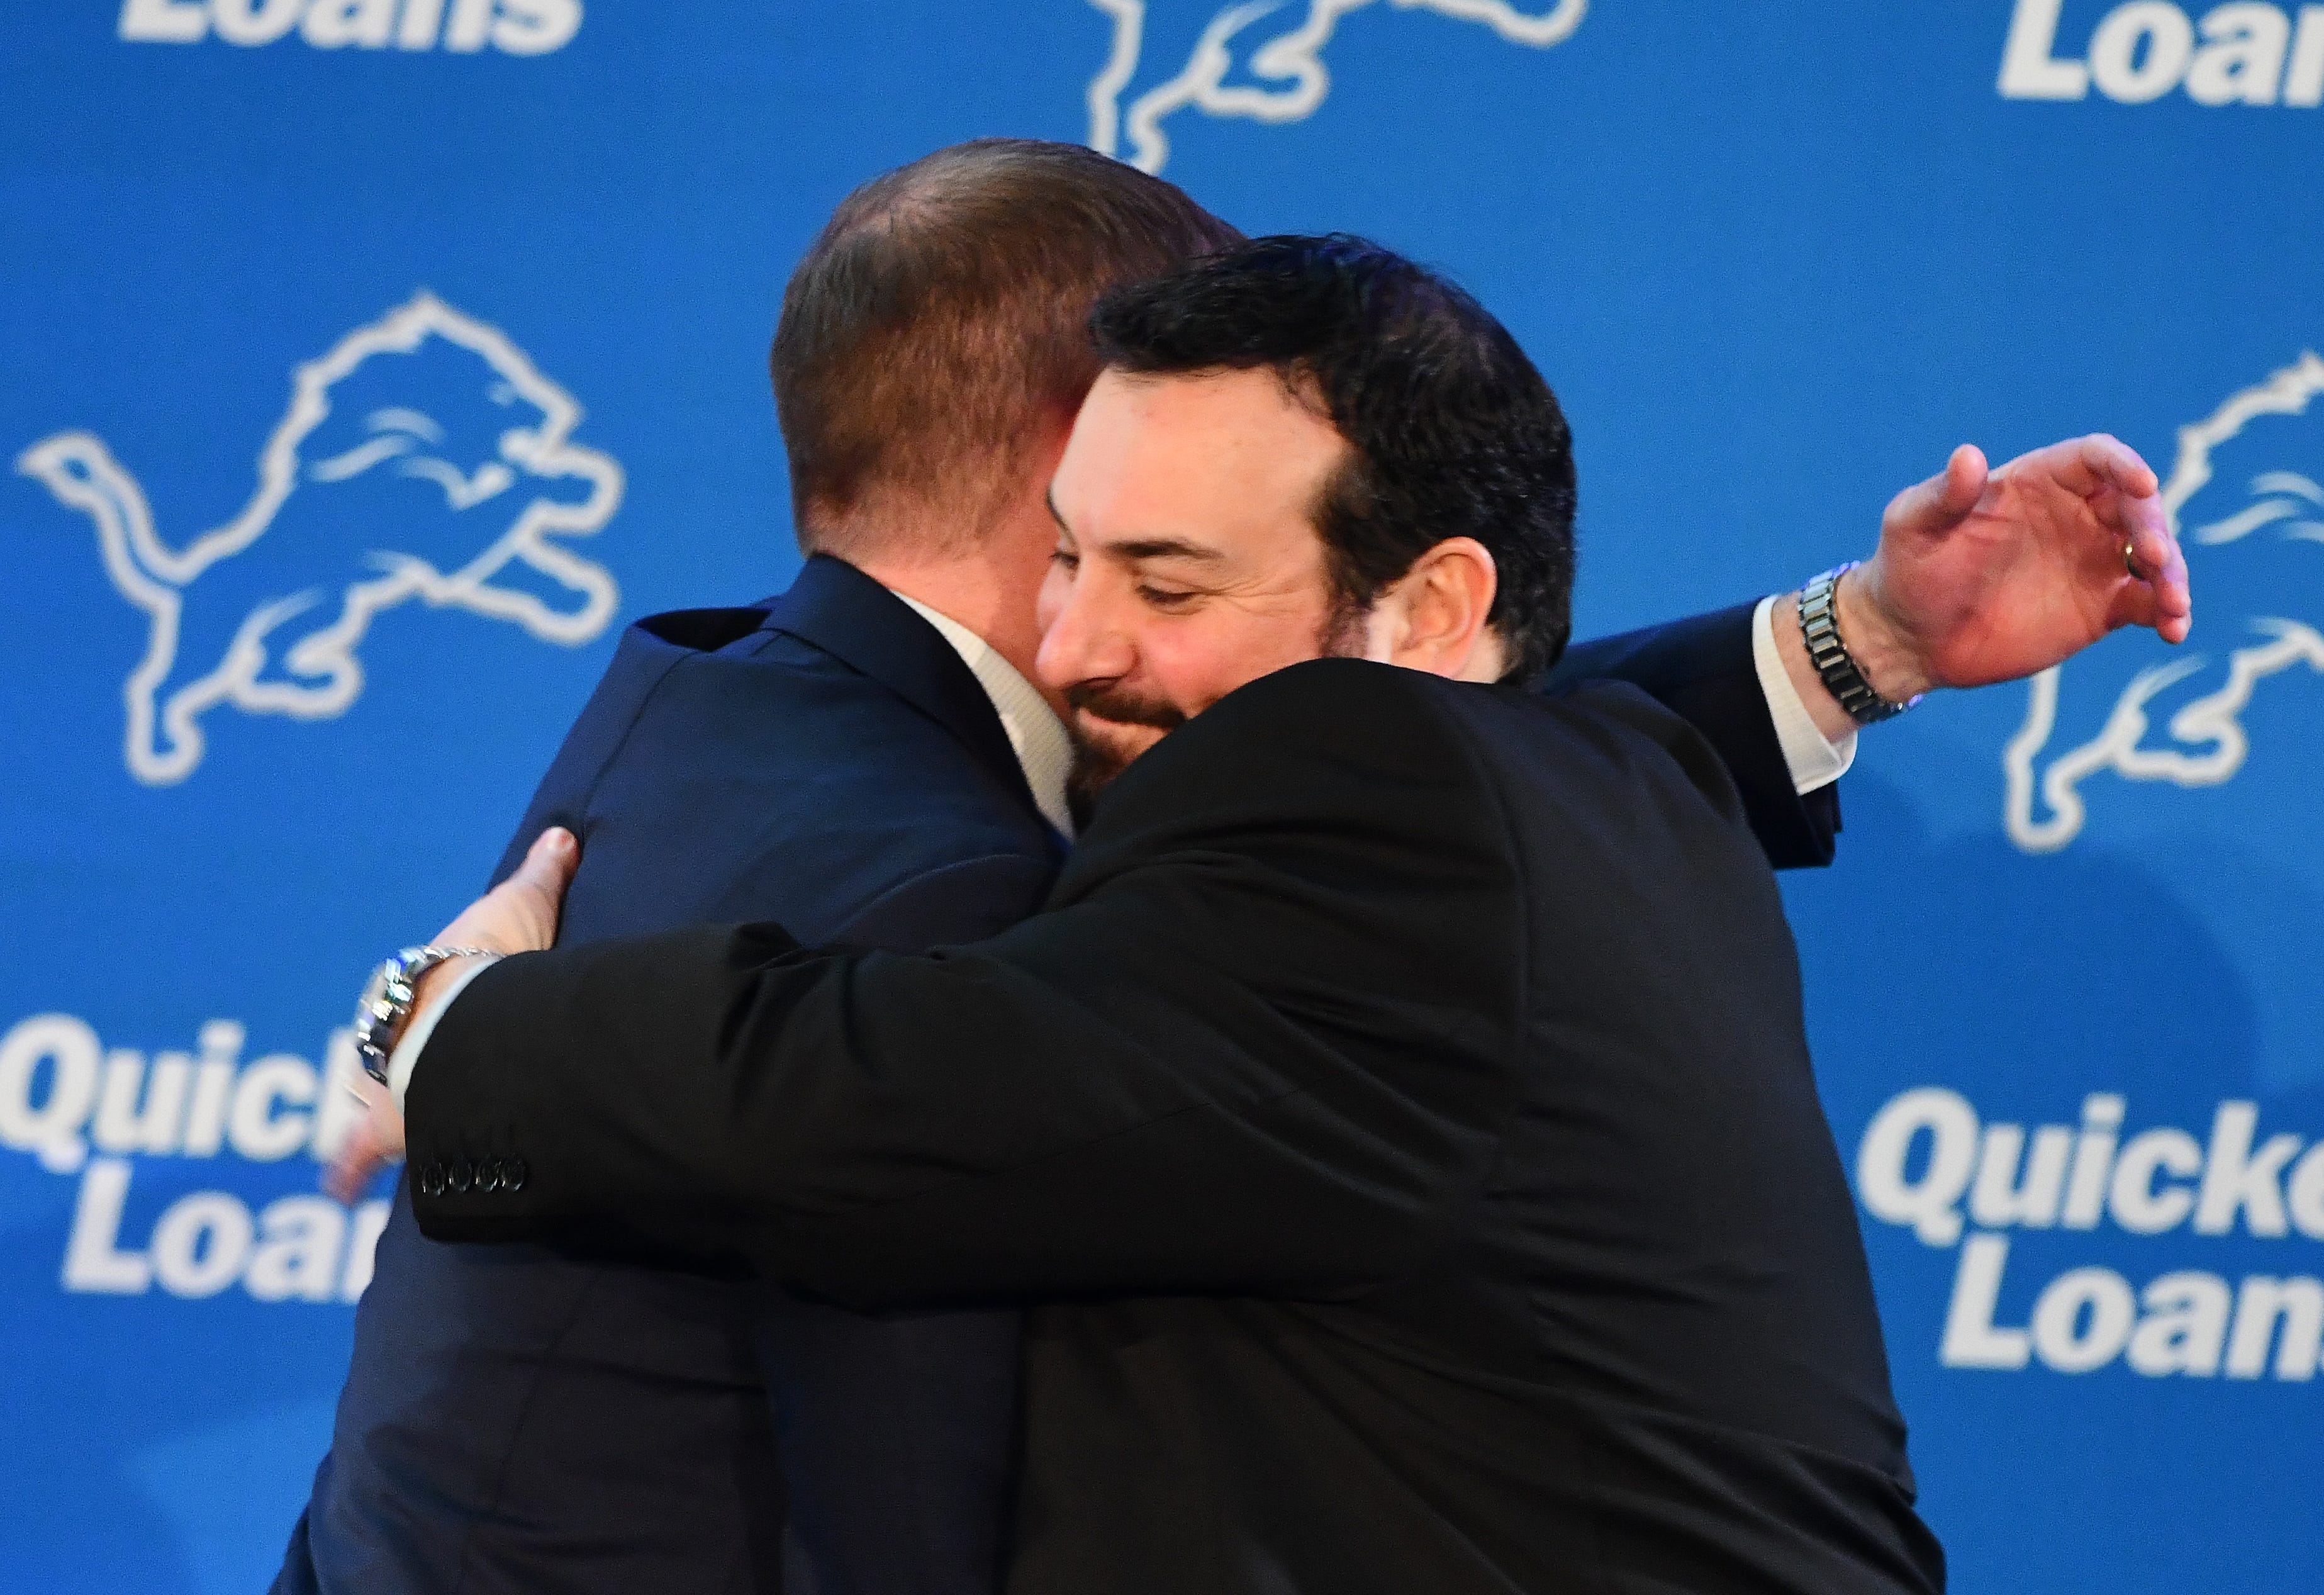 New Detroit Lions head coach Matt Patricia hugs Lions GM Bob Quinn during the introductory press conference at training facility in Allen Park, Michigan on February 7, 2018.